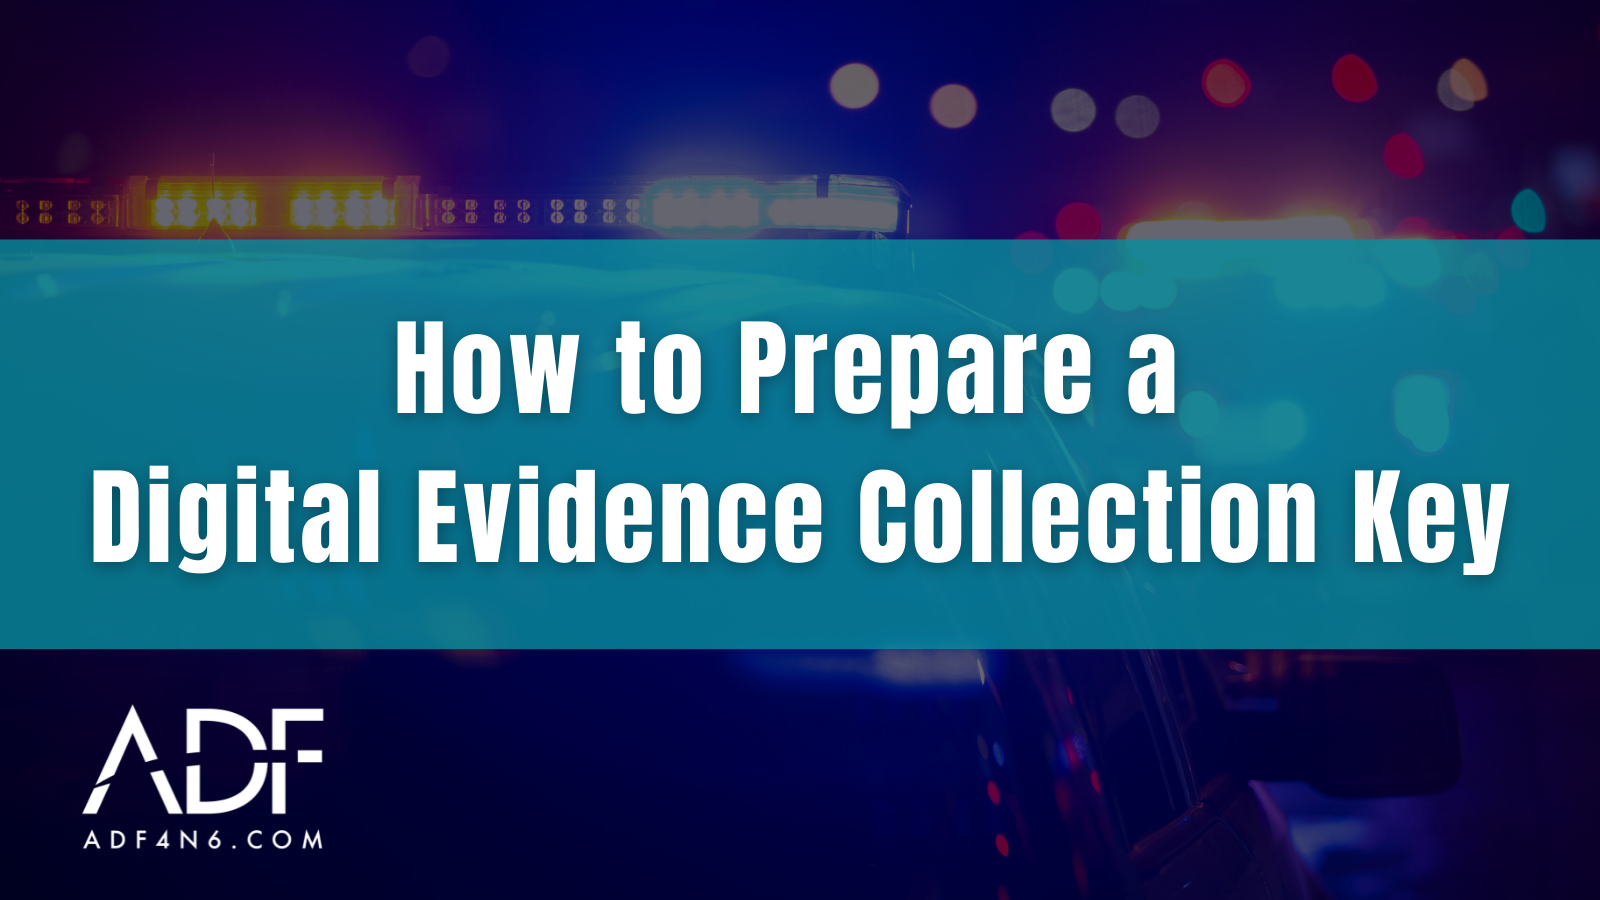 How to Prepare a Digital Evidence Collection Key (CKY) (UPDATED August 2022)